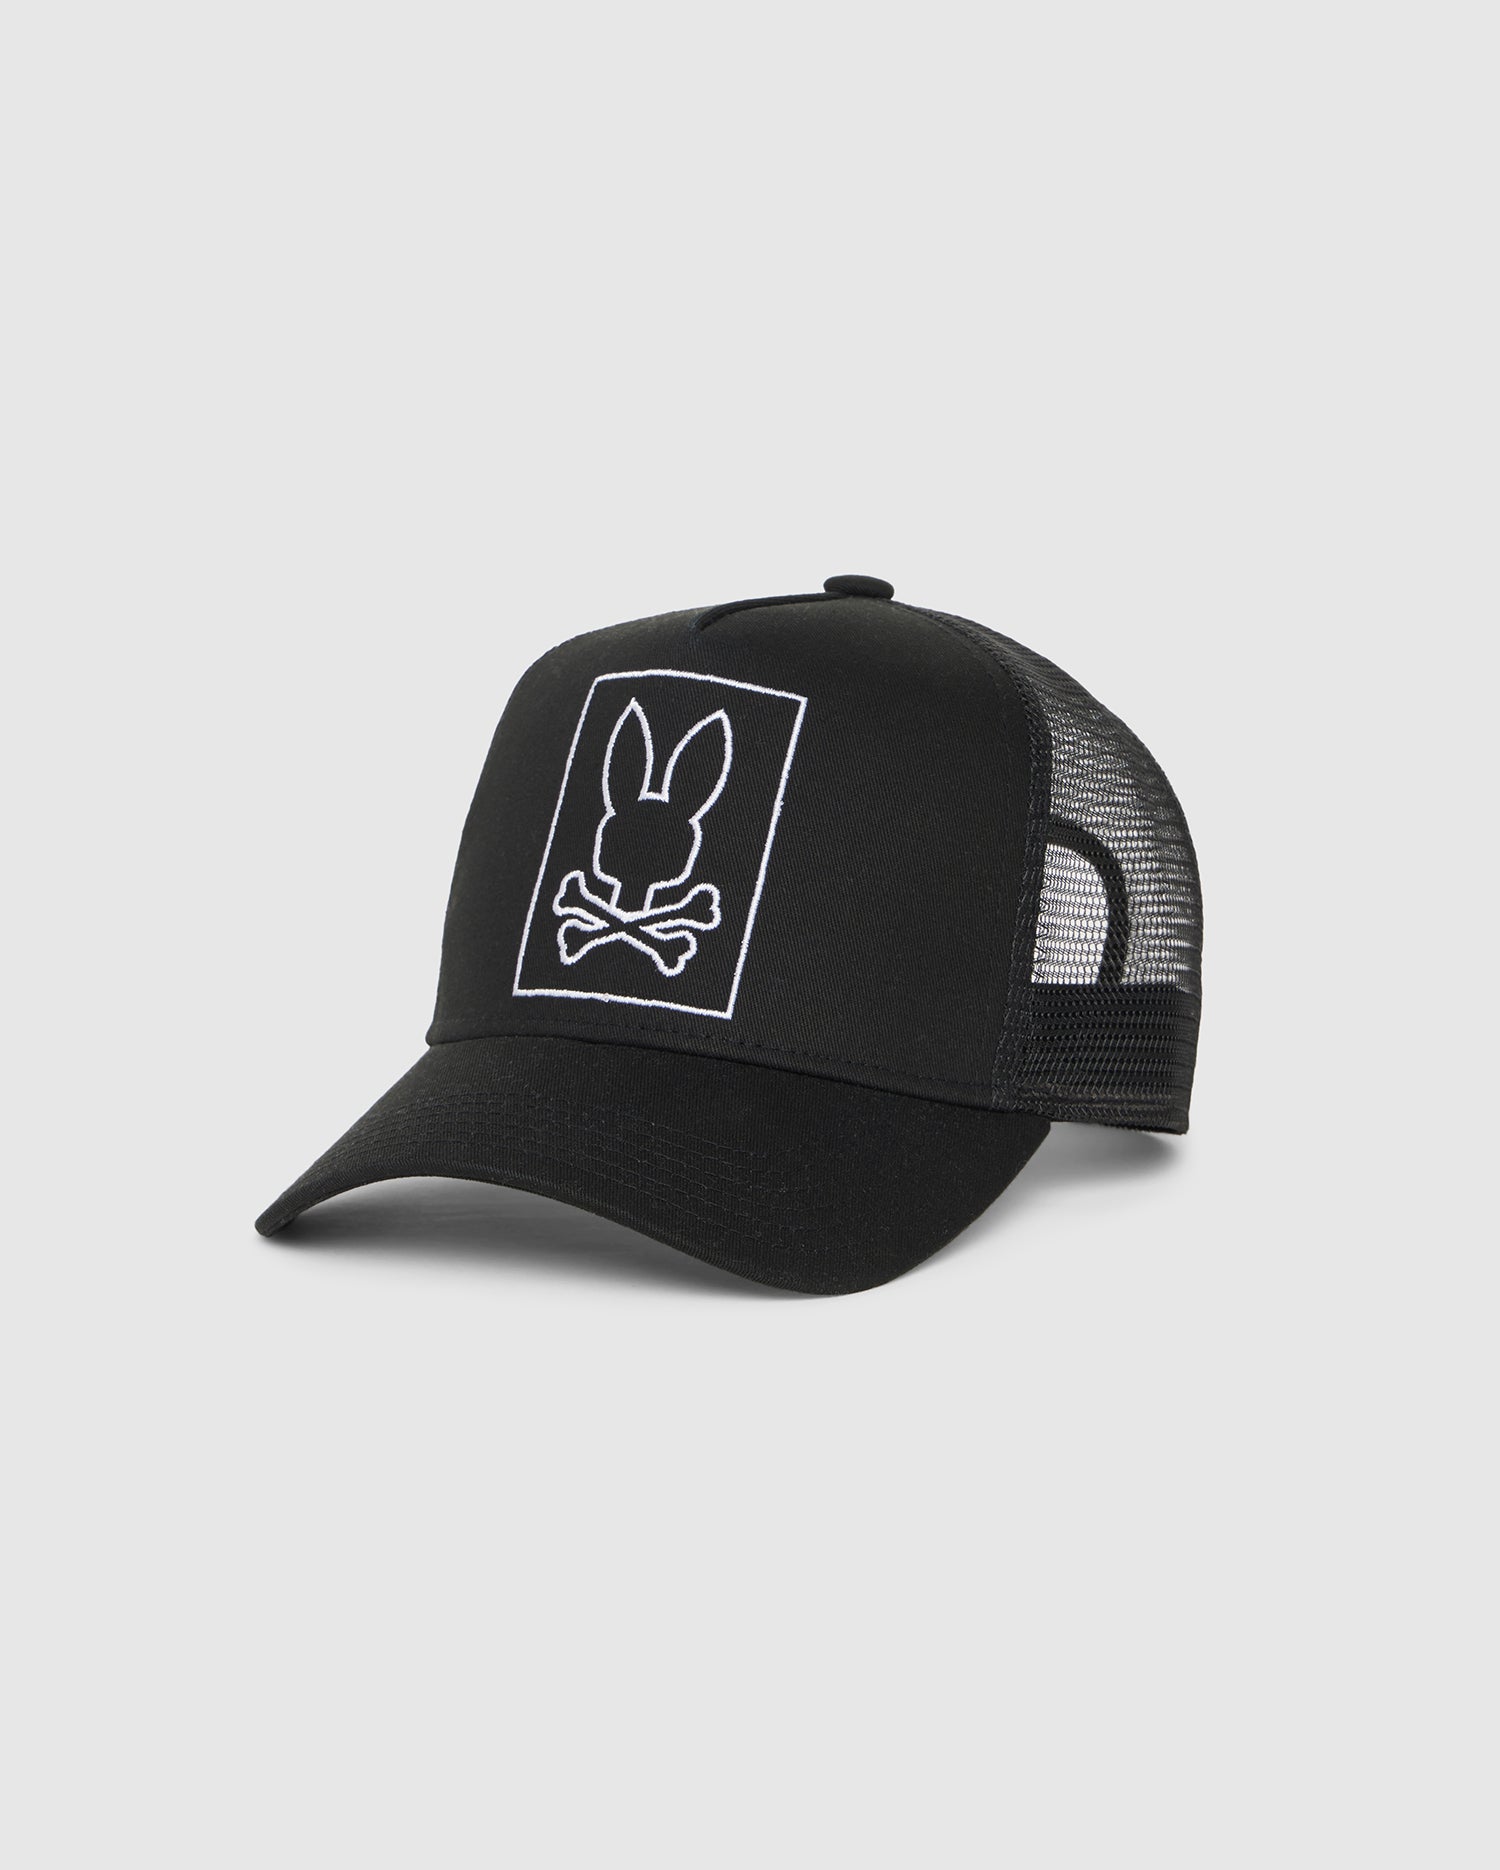 A black Psycho Bunny Livingston trucker hat with an embroidered bunny design on it.